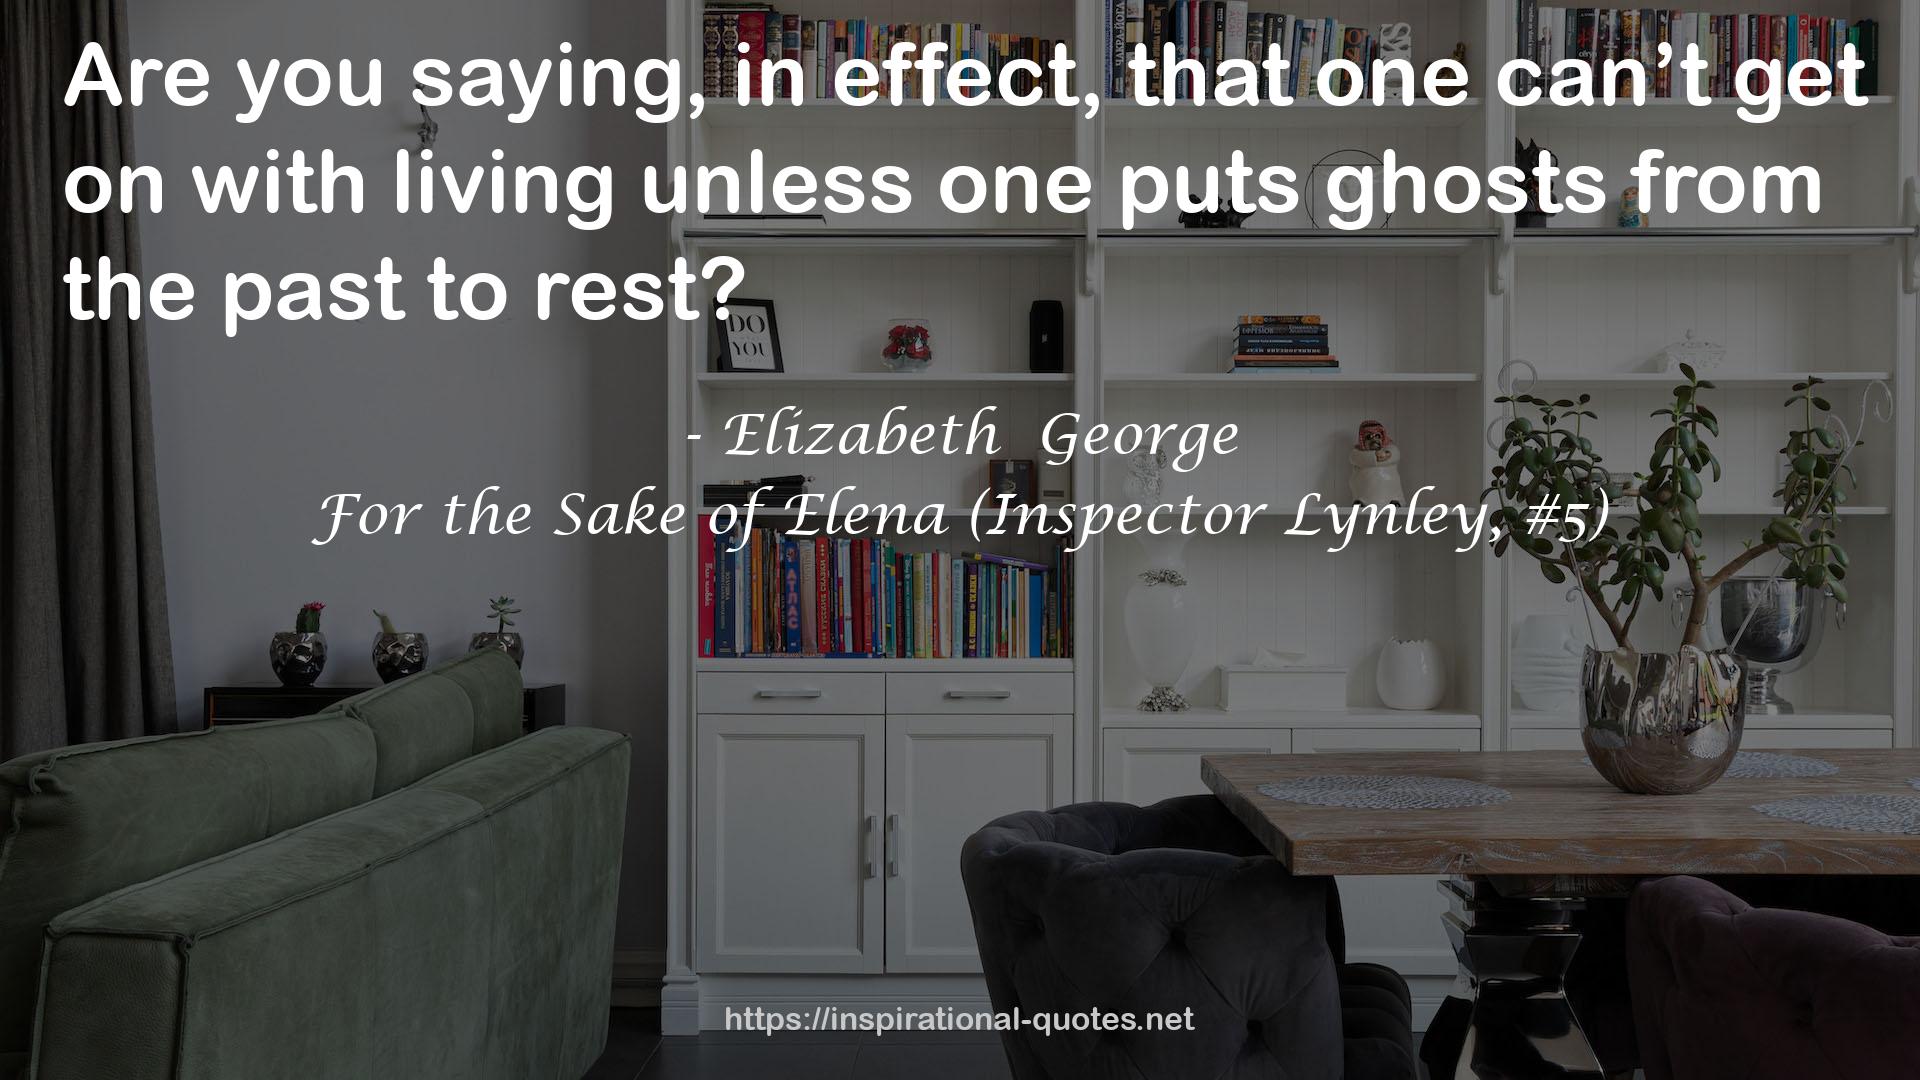 For the Sake of Elena (Inspector Lynley, #5) QUOTES